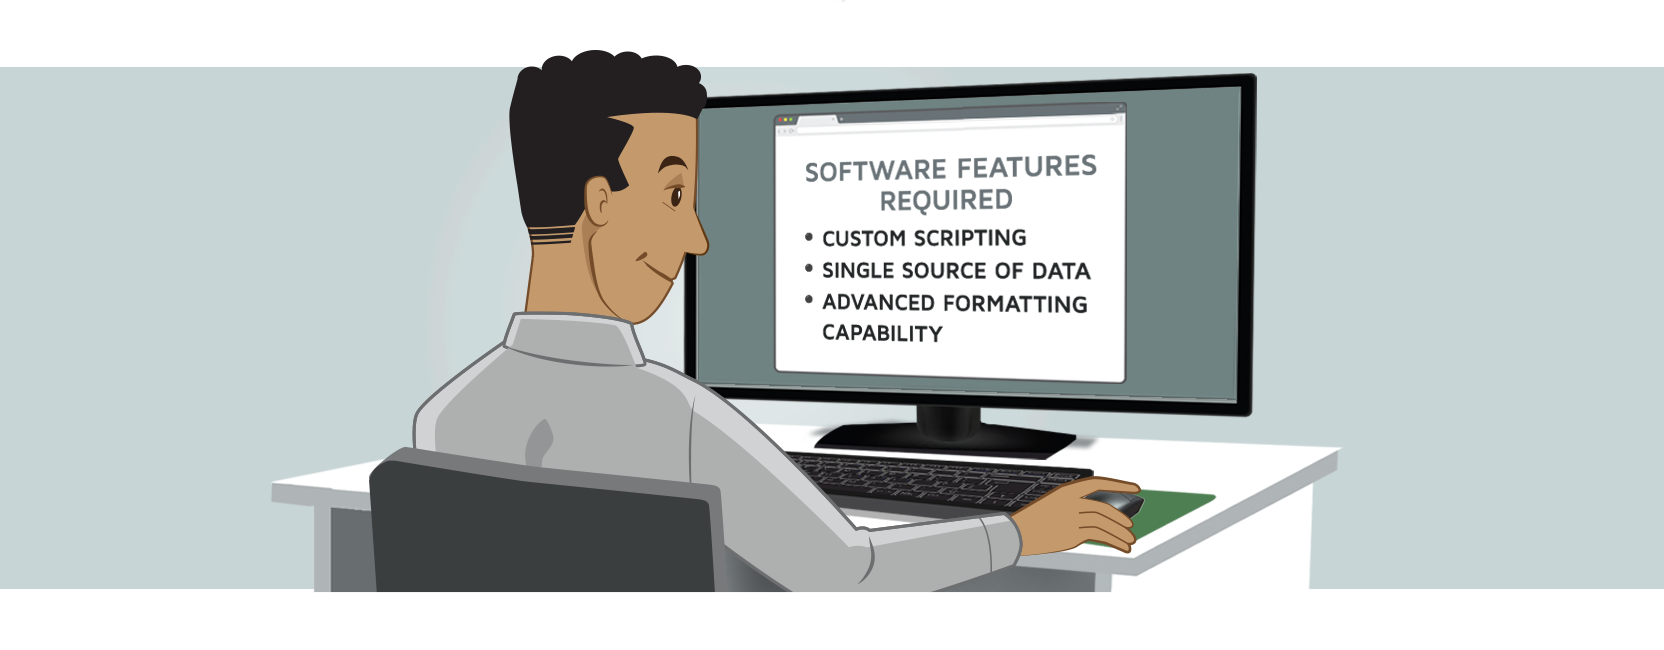 software_features